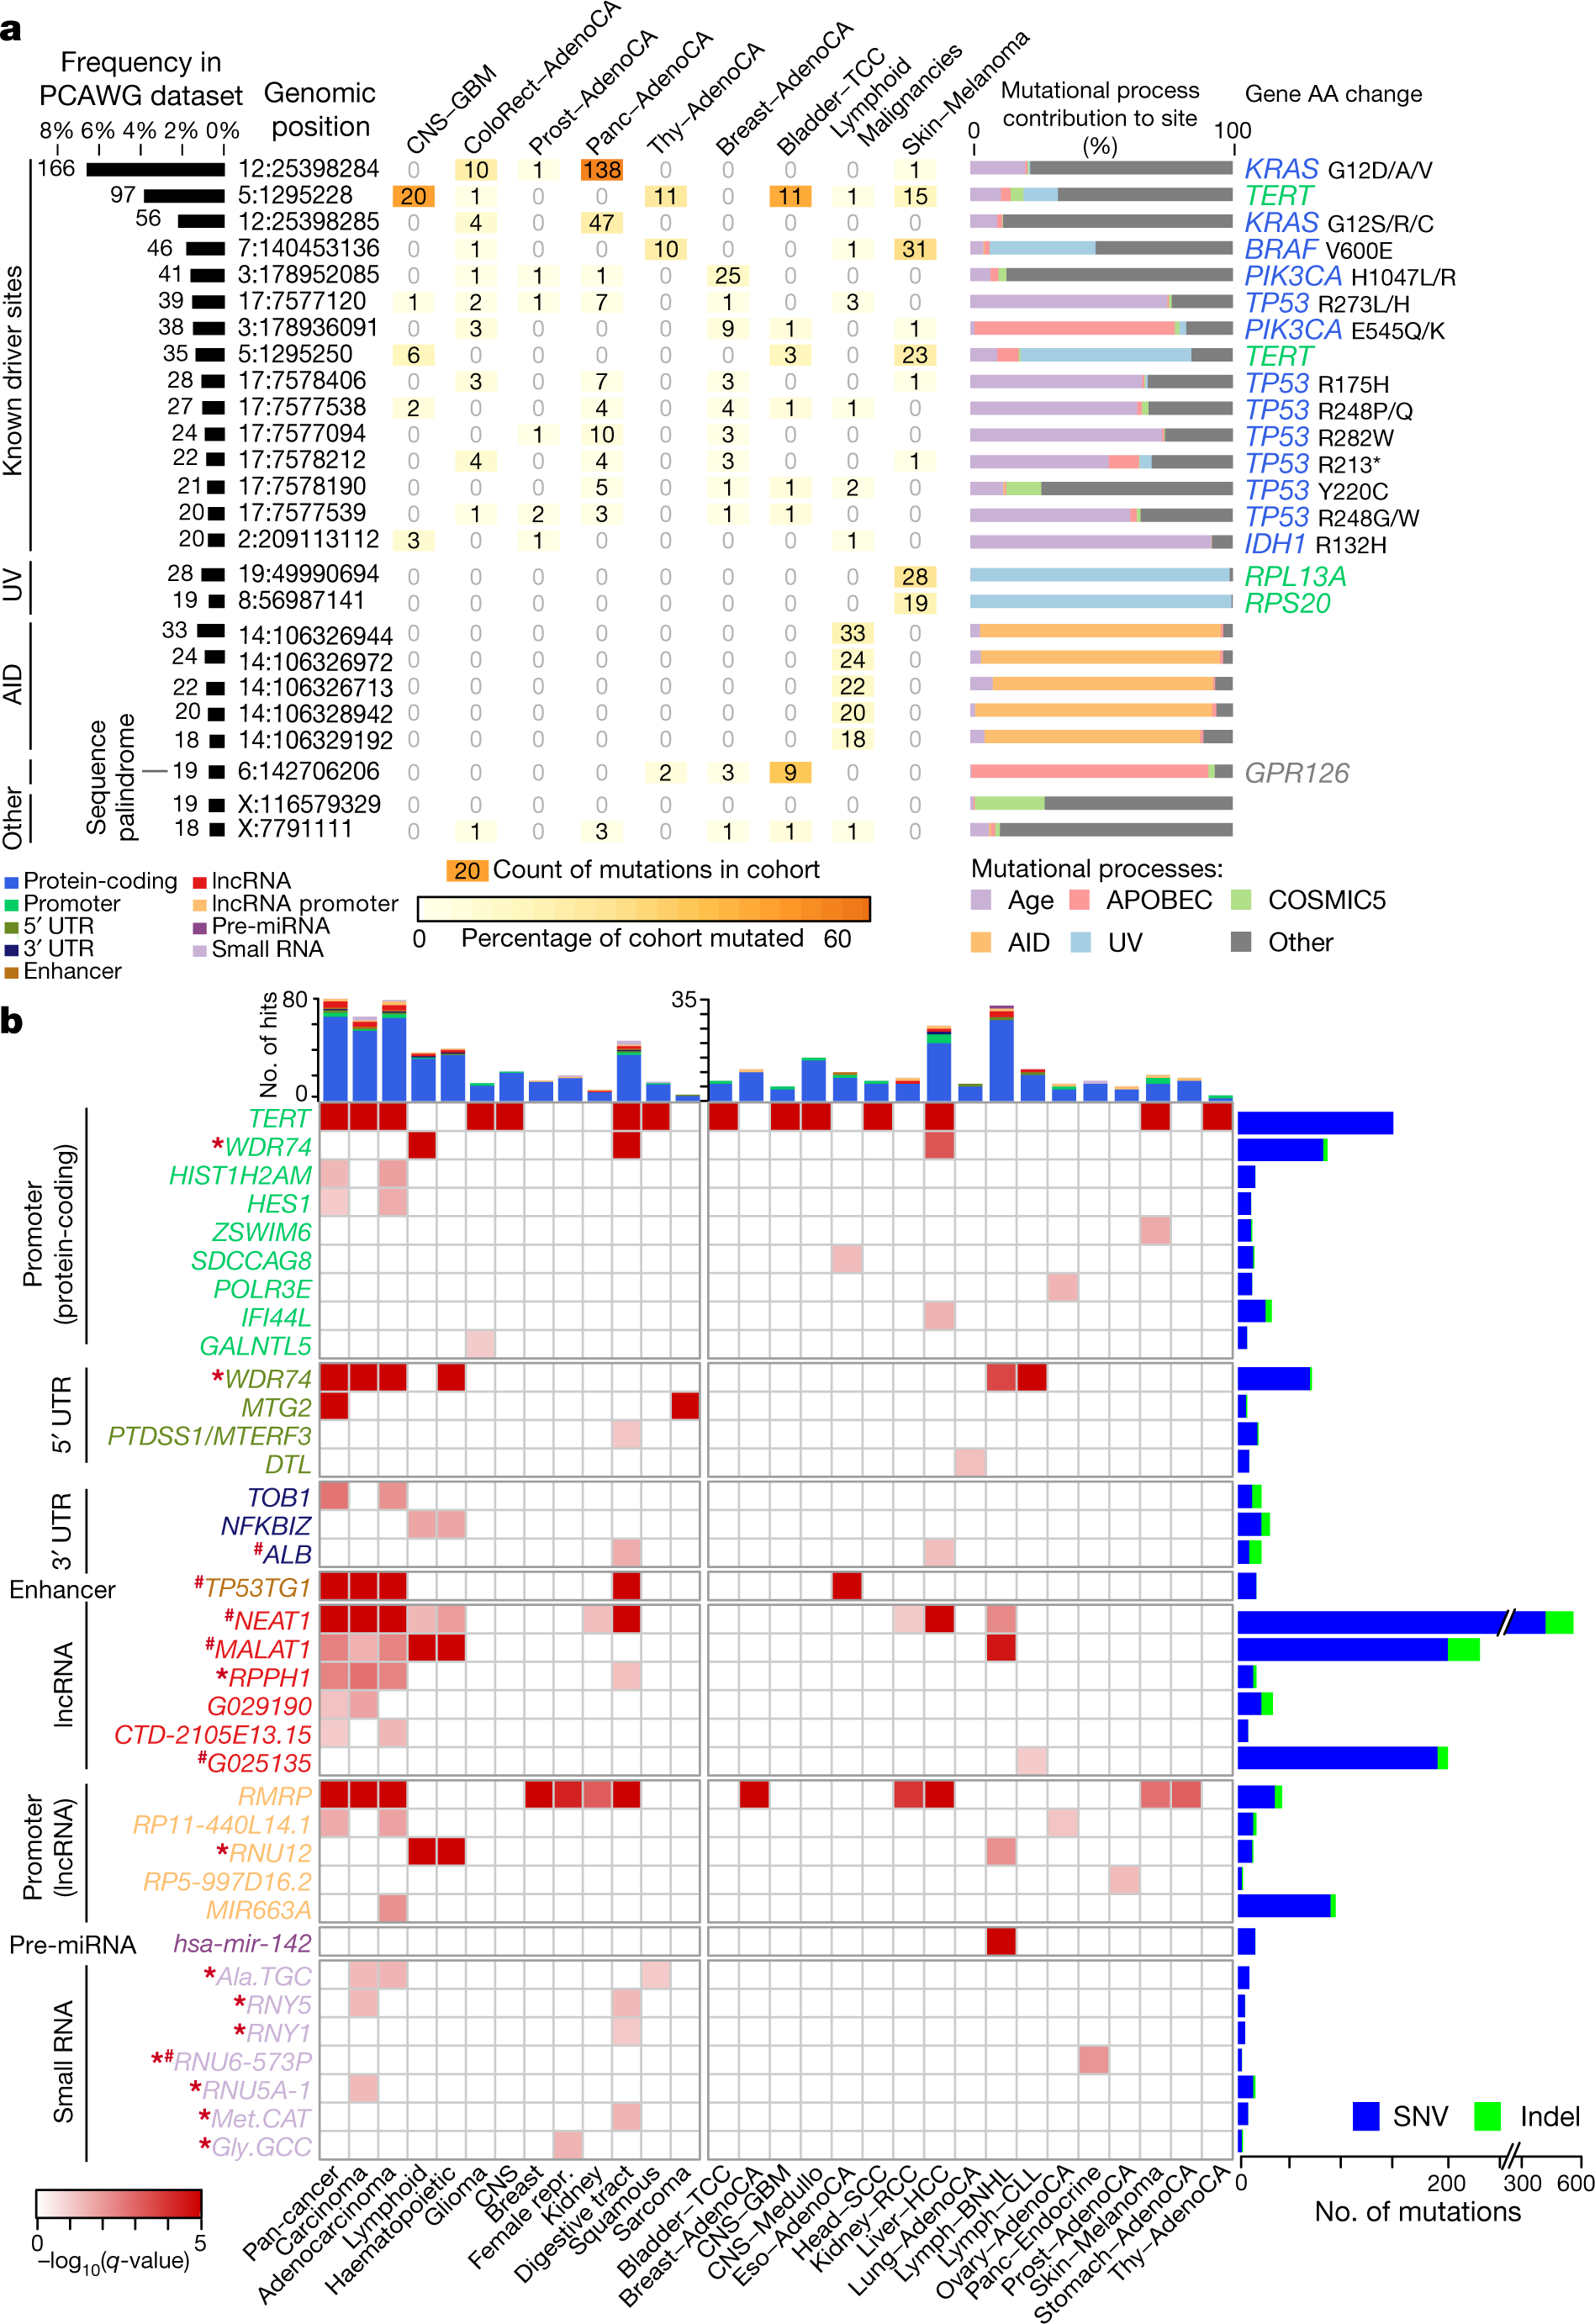 Analyses of non-coding somatic drivers in 2,658 cancer whole genomes |  Nature